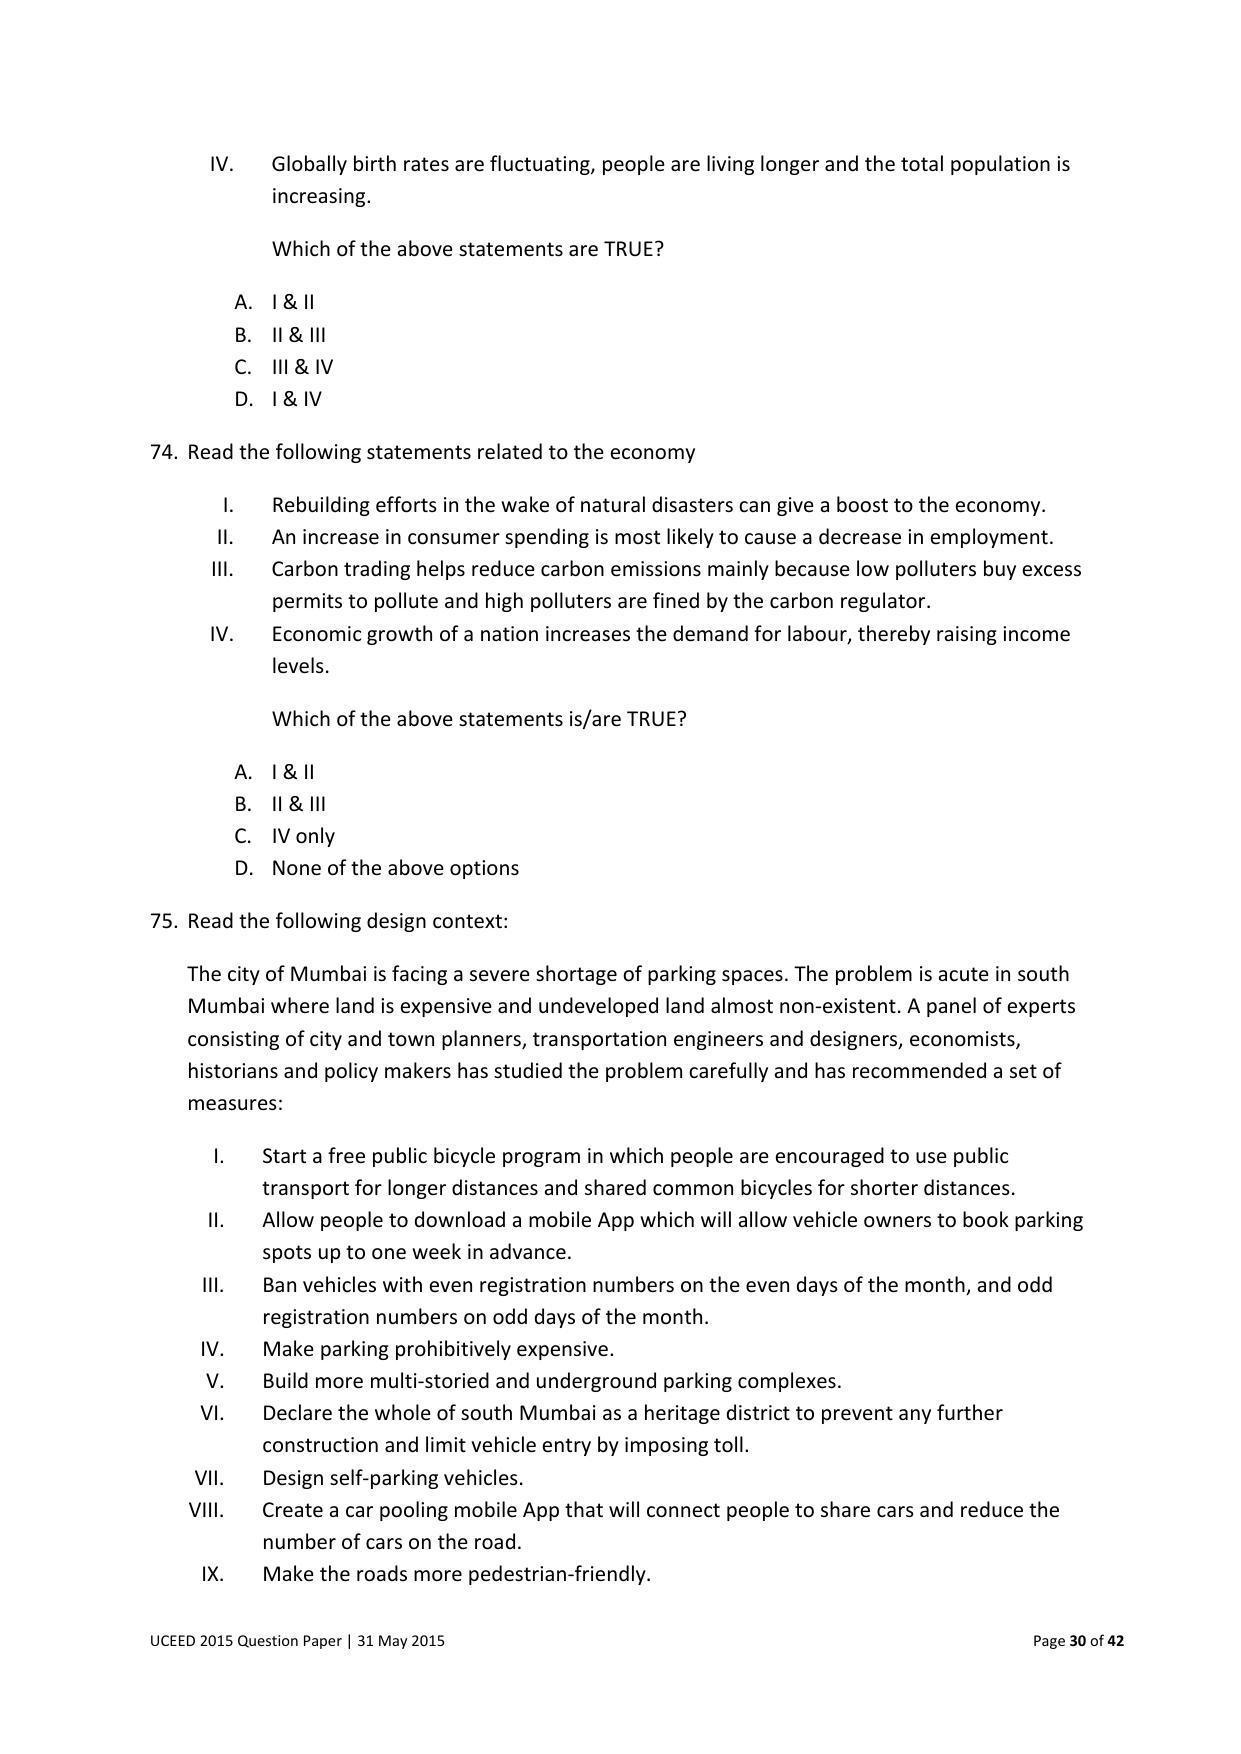 UCEED 2015 Question Paper - Page 30